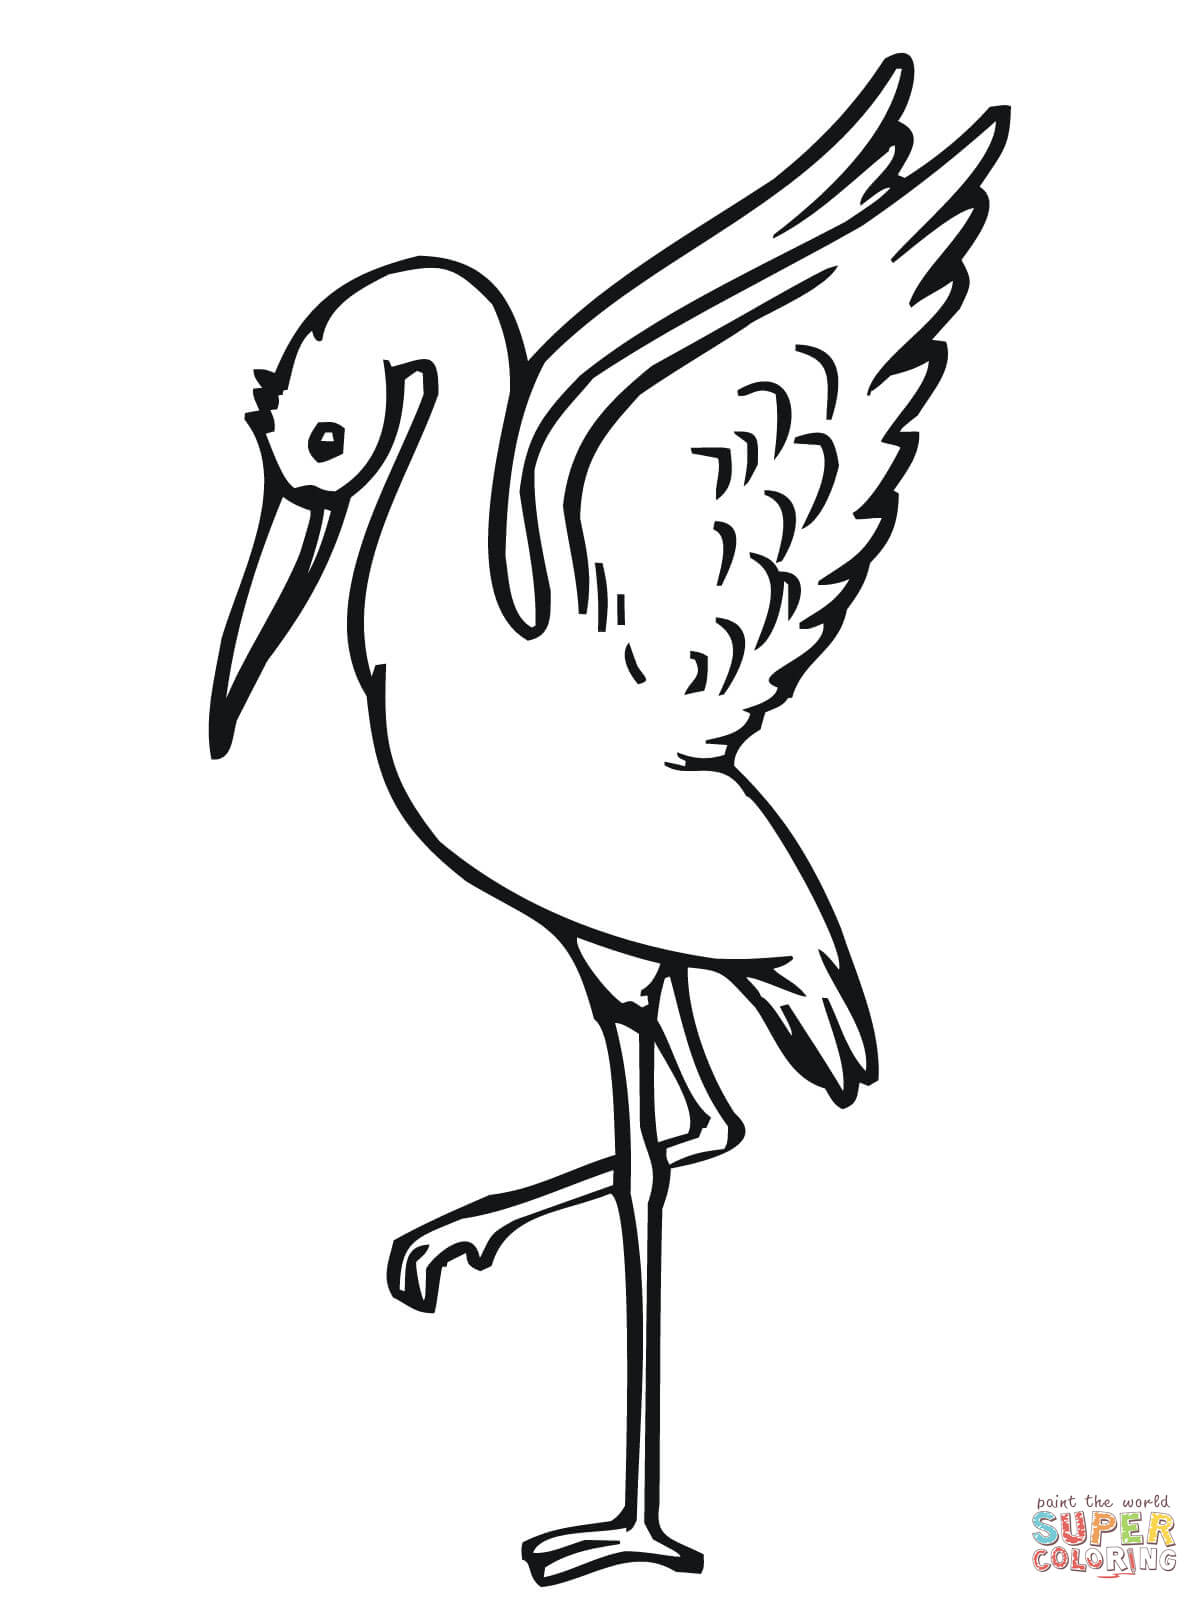 White Stork coloring, Download White Stork coloring for free 2019